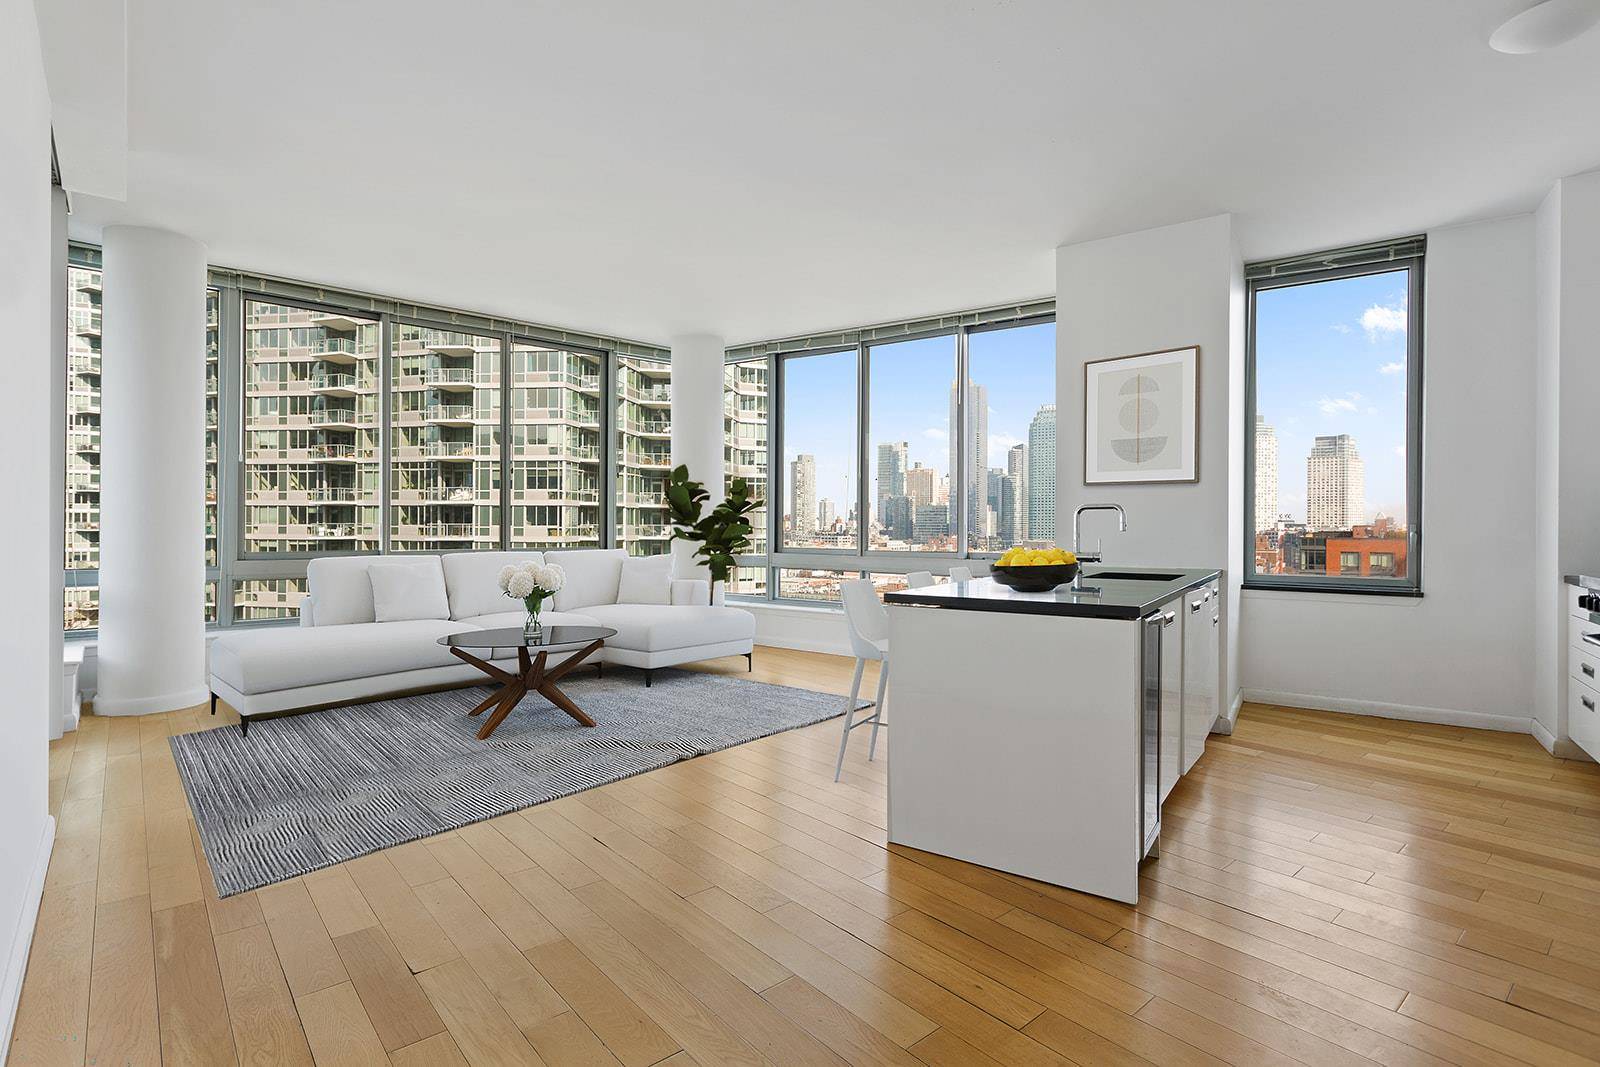 This gorgeous 3 bed 3 bath available at The View condos is luxury at its best !